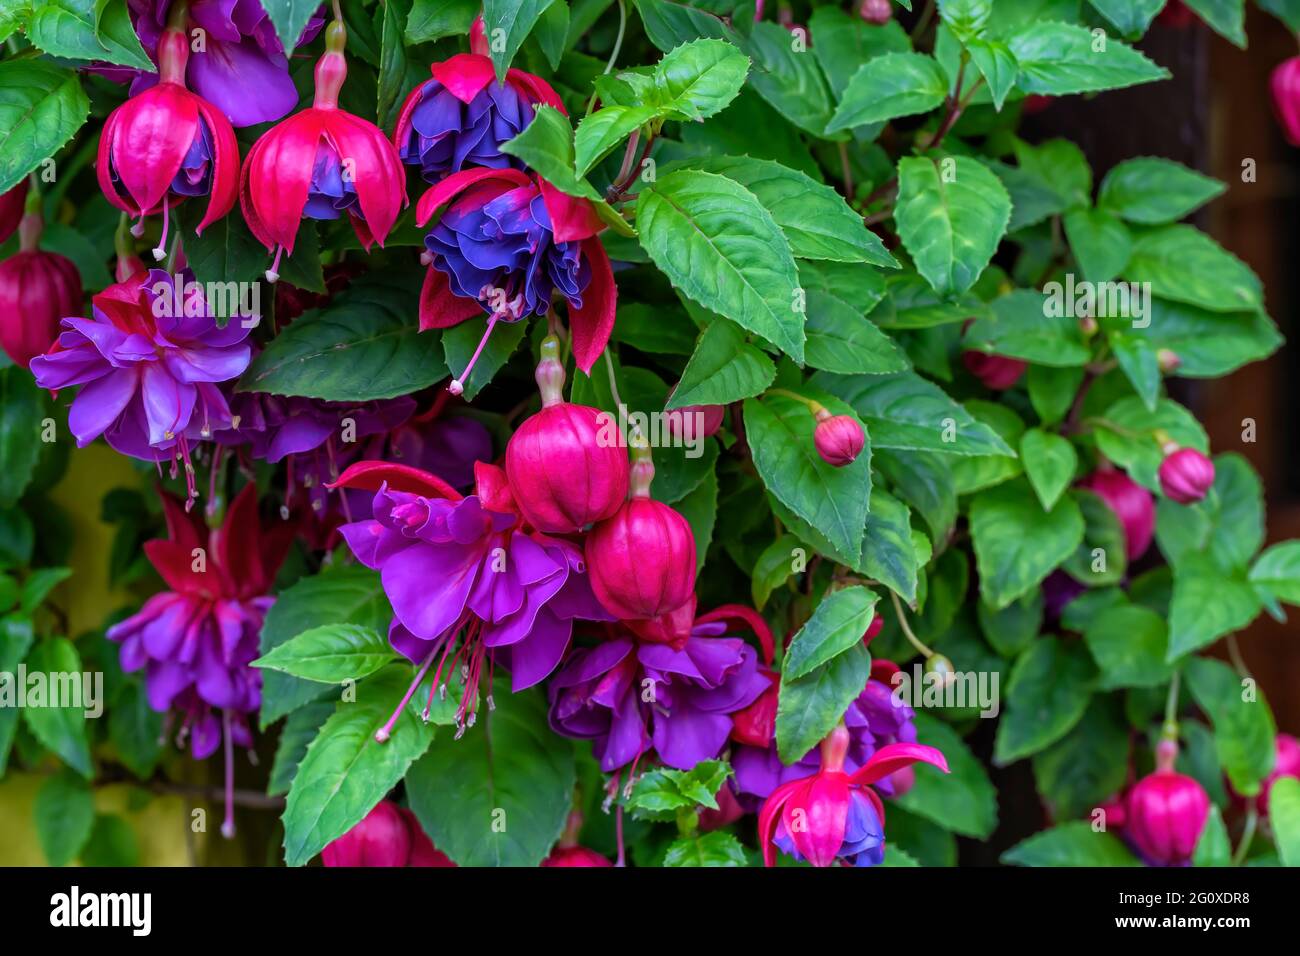 Detail of the flowering of a Fuchsia triphylla plant Stock Photo